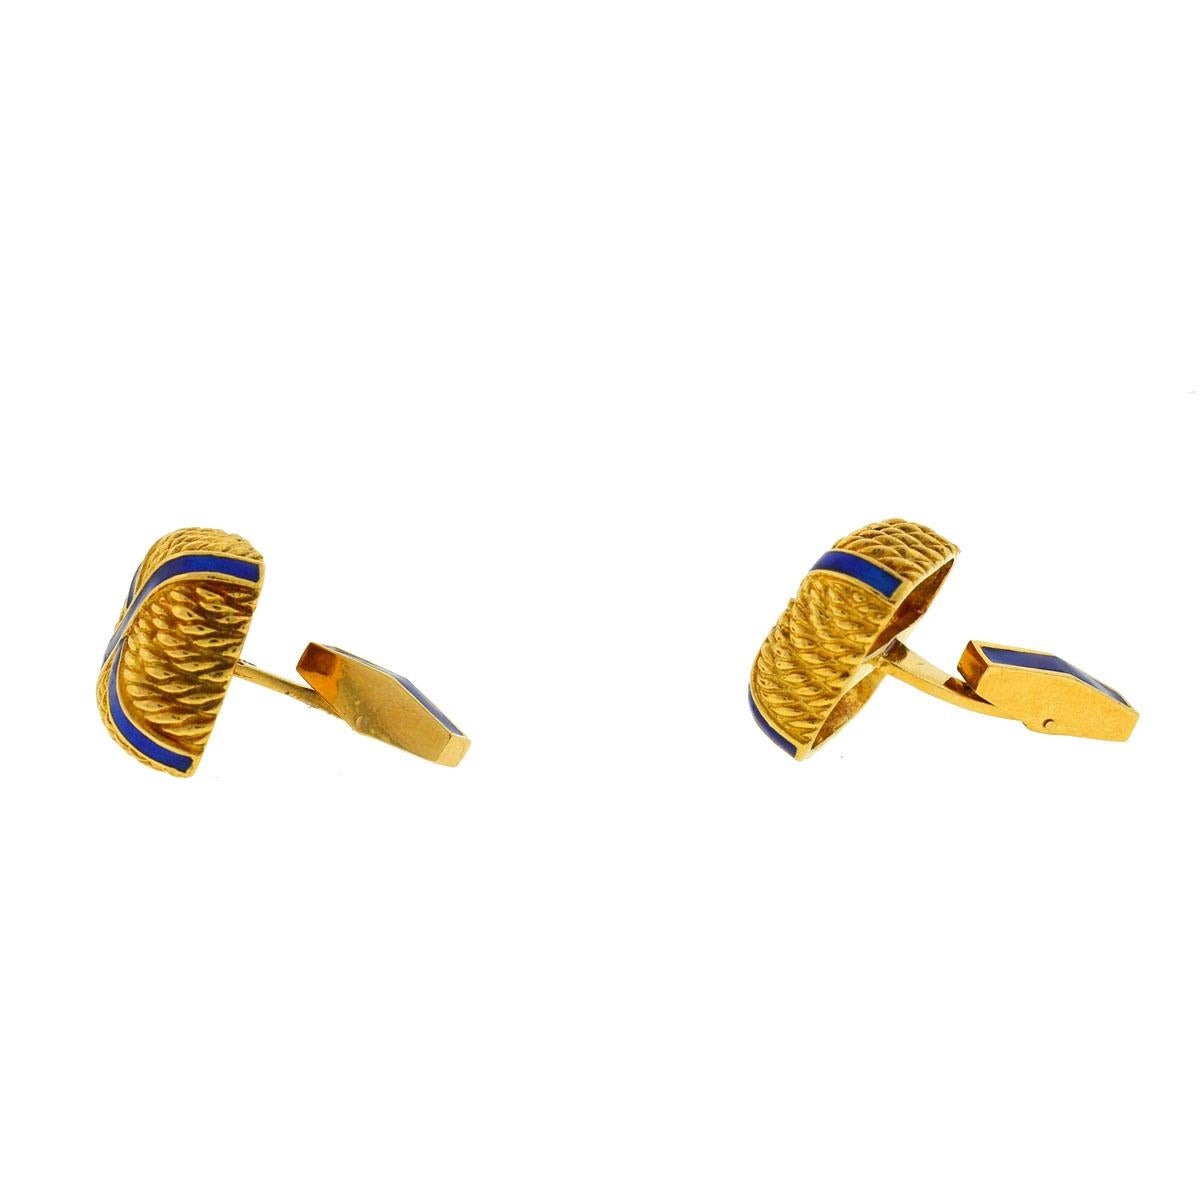 Style-Square with X Blue Enamel Cufflinks  
Metal-18k Yellow Gold 
Stones-N/A
Size -17mm
Weight-24.65 Grams
Includes-Cufflinks ONLY 
SKU-1610-2MAE